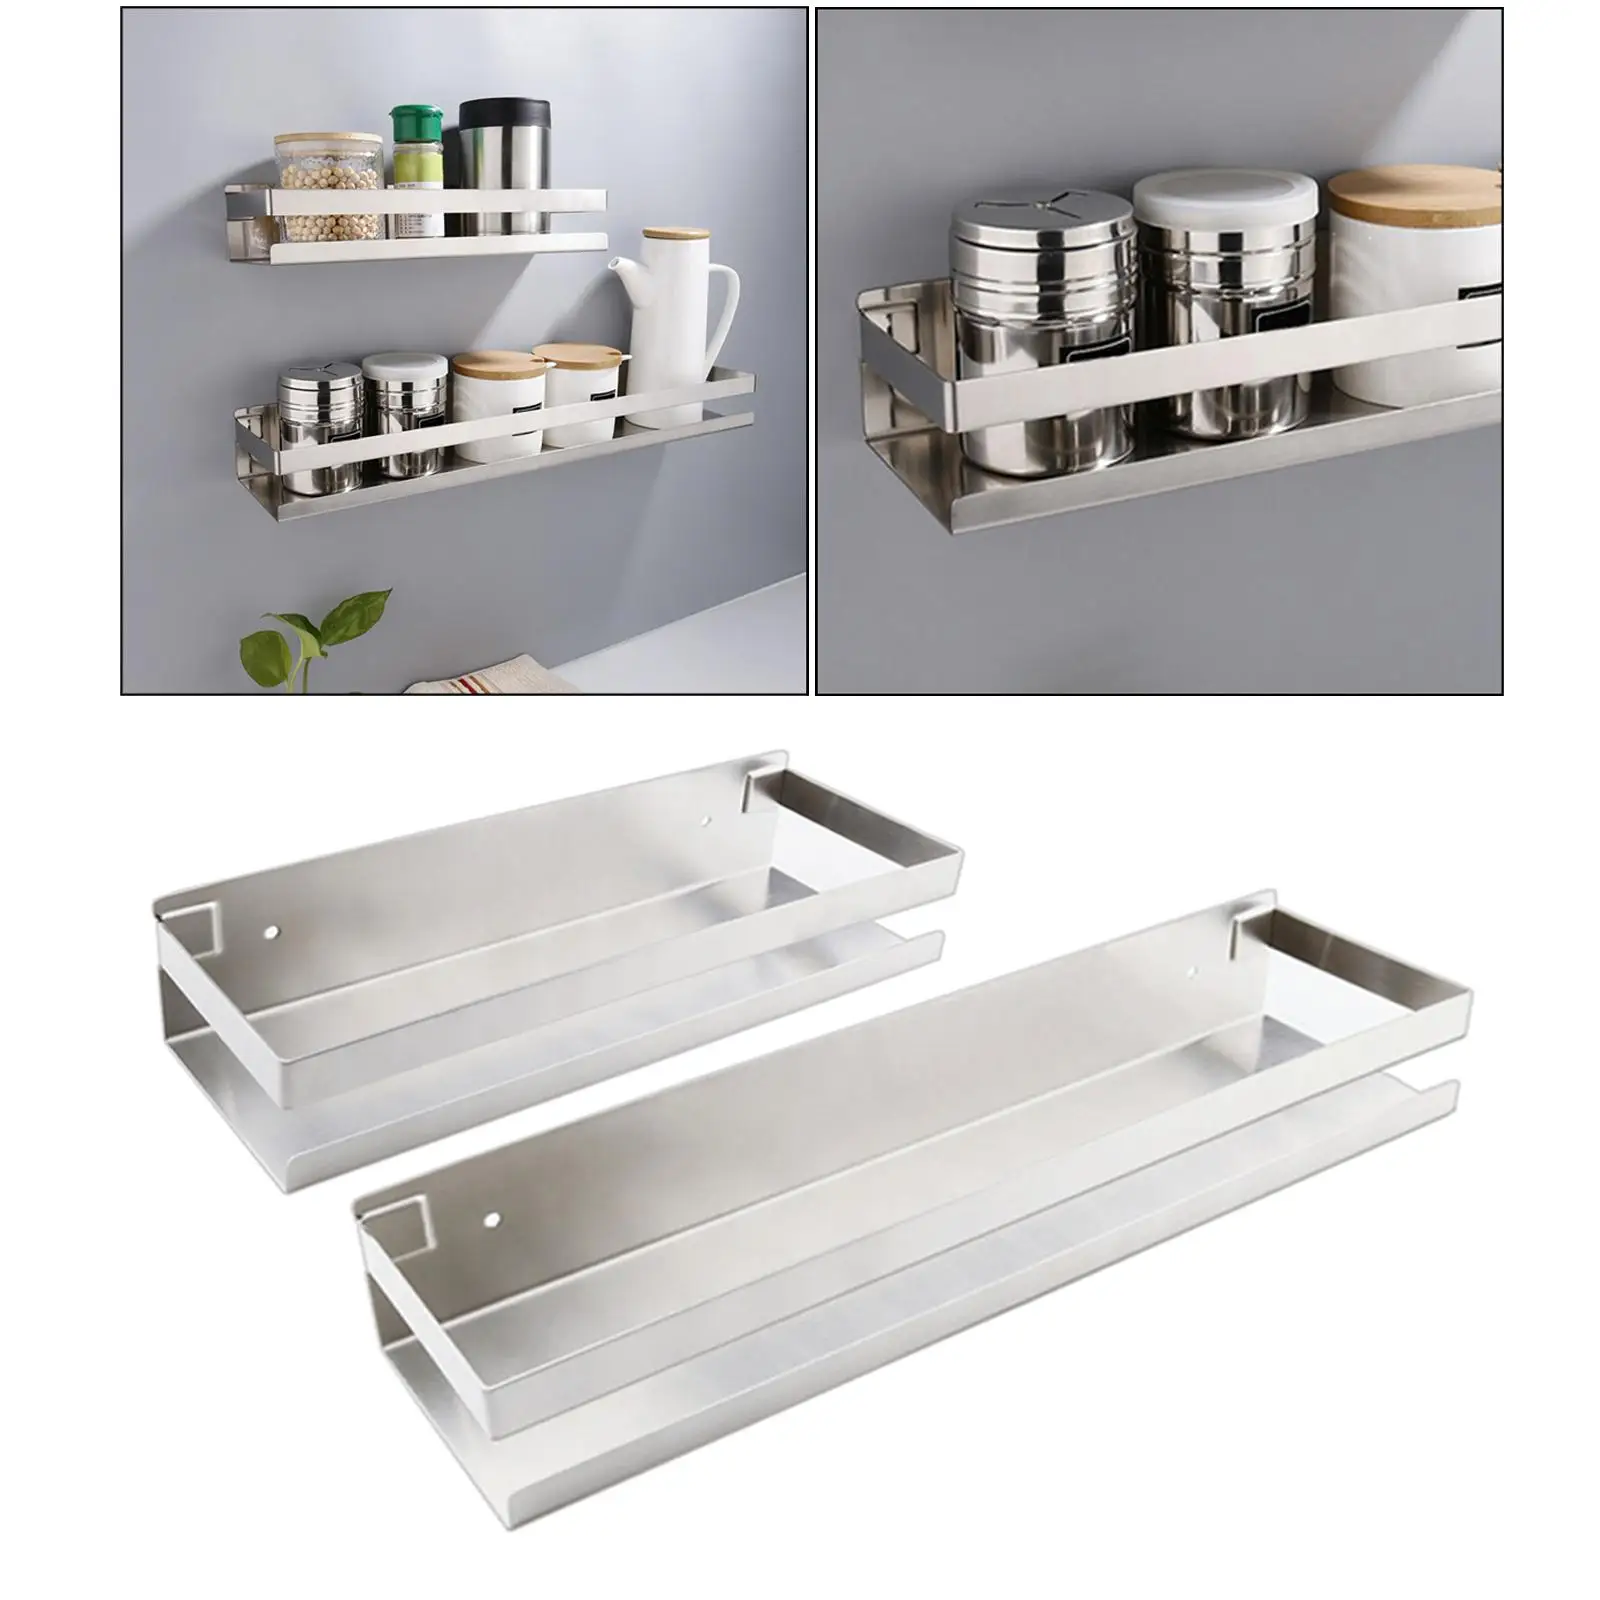 Simple Shelf High Quality Easy to Maintain and Clean